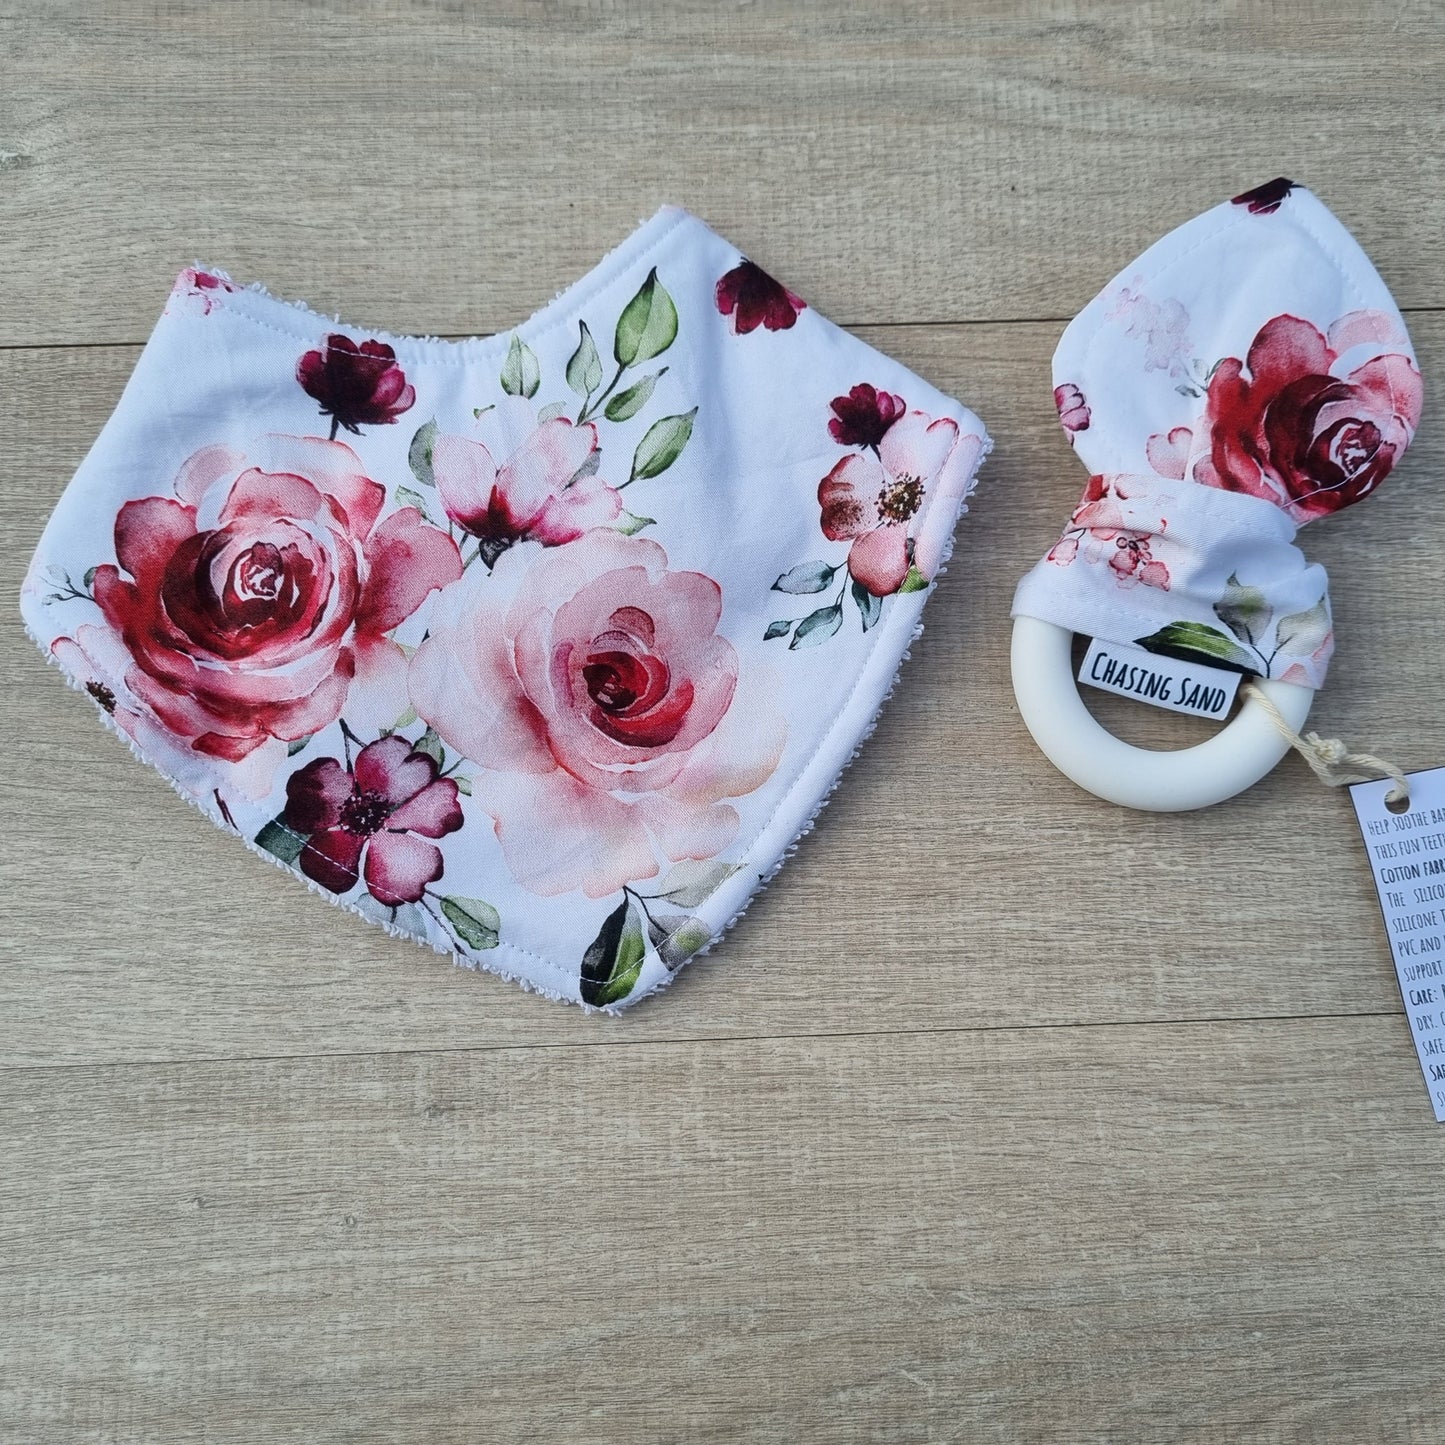 2 Piece Gift Set - Rose Garden against wooden backdrop. Pink watercolour rose design with green leaves on white background. Each set contains 1x Dribble Bib and 1x Teether.